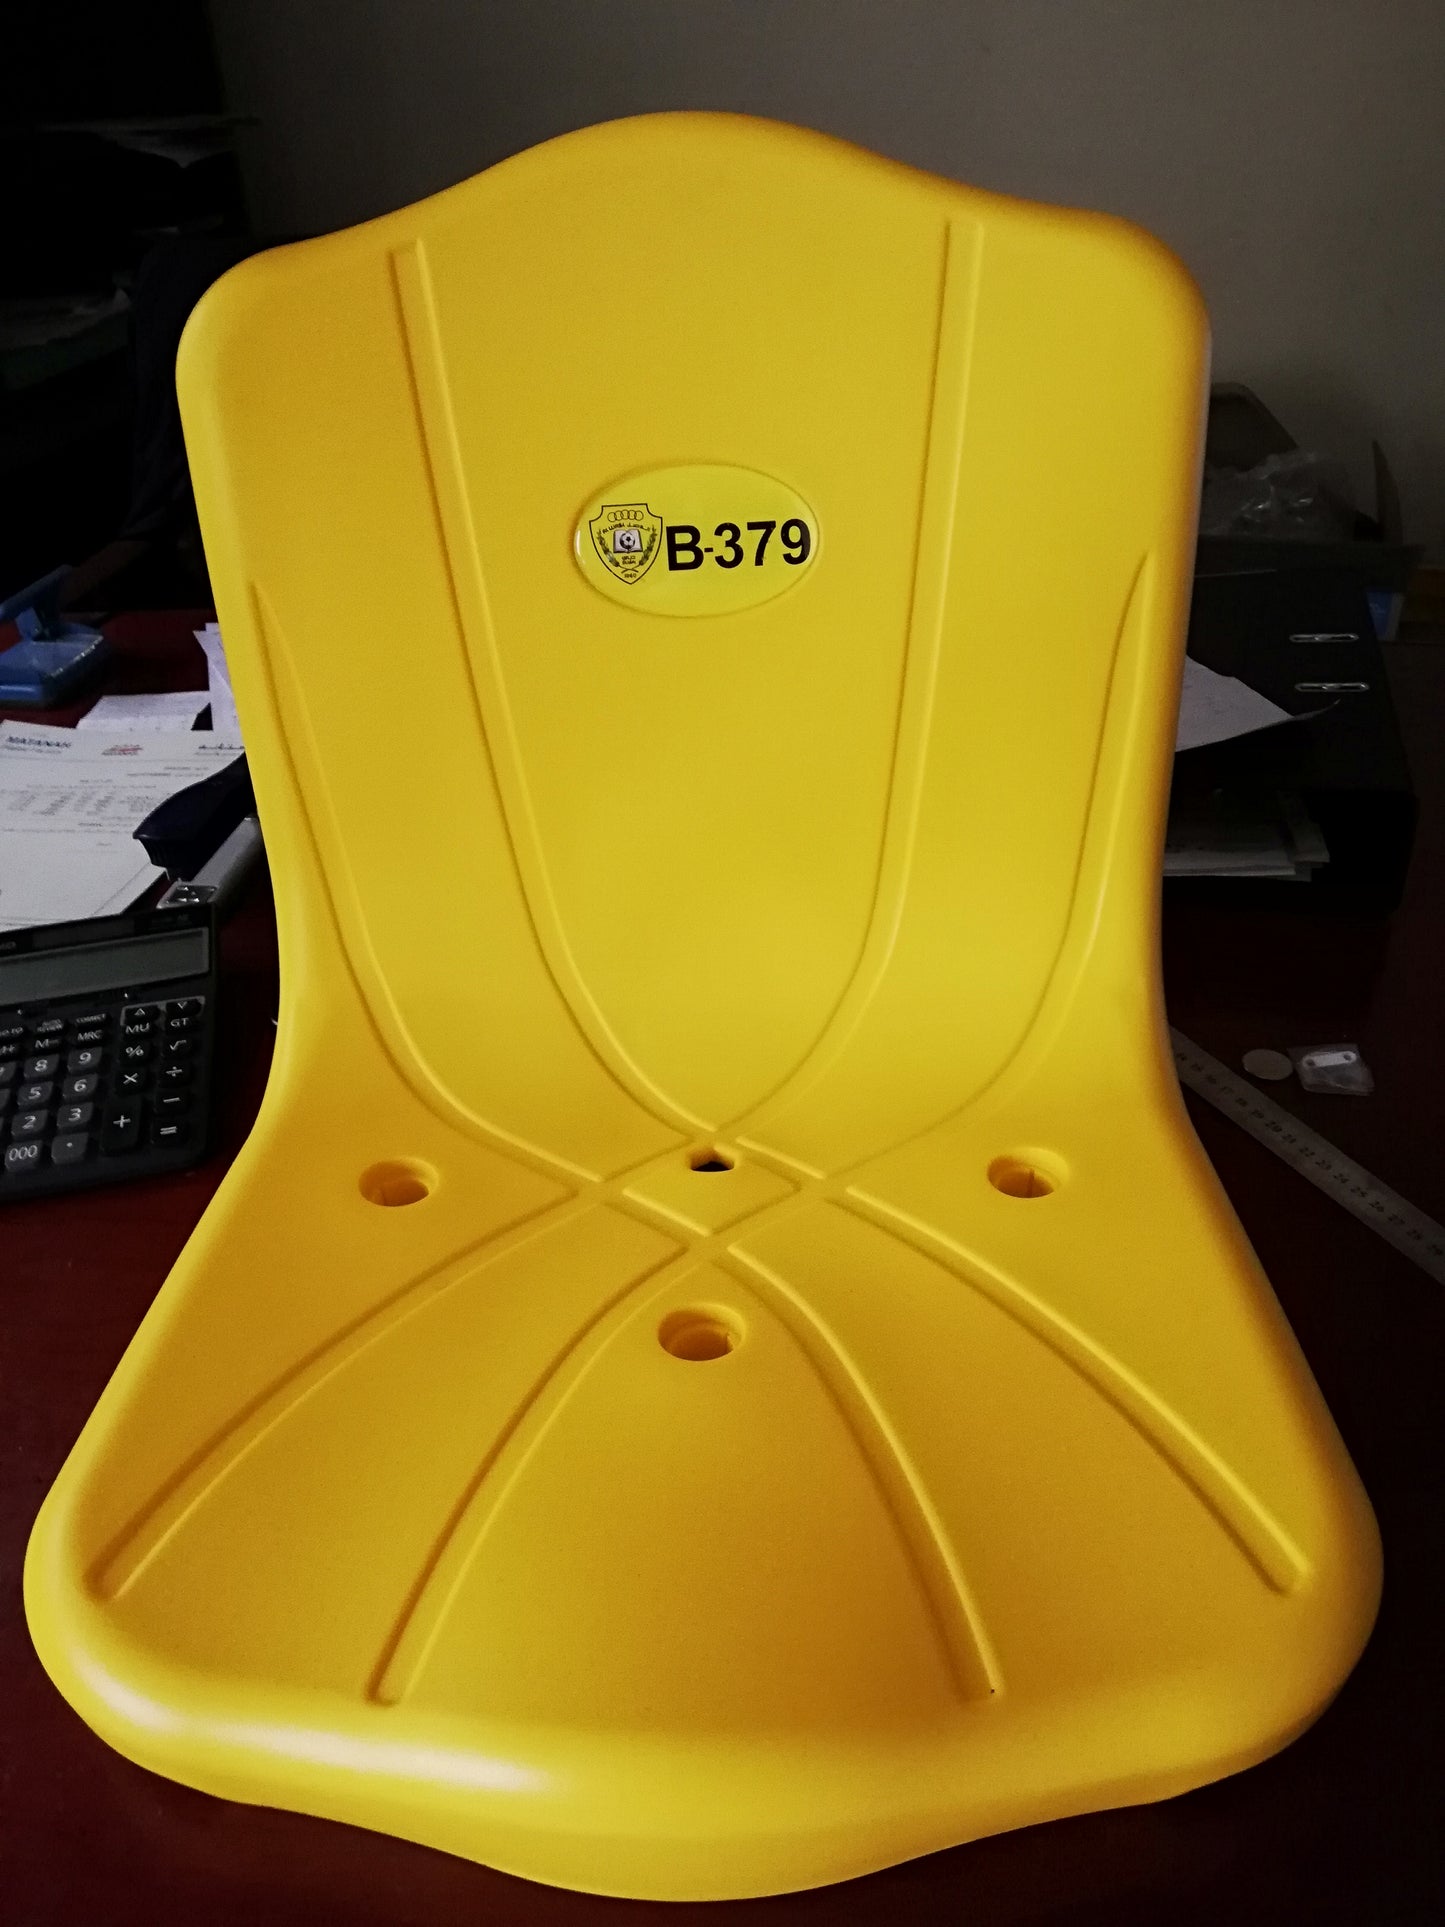 Backrest Double layer (wall ) Stadium Seat MT-2031